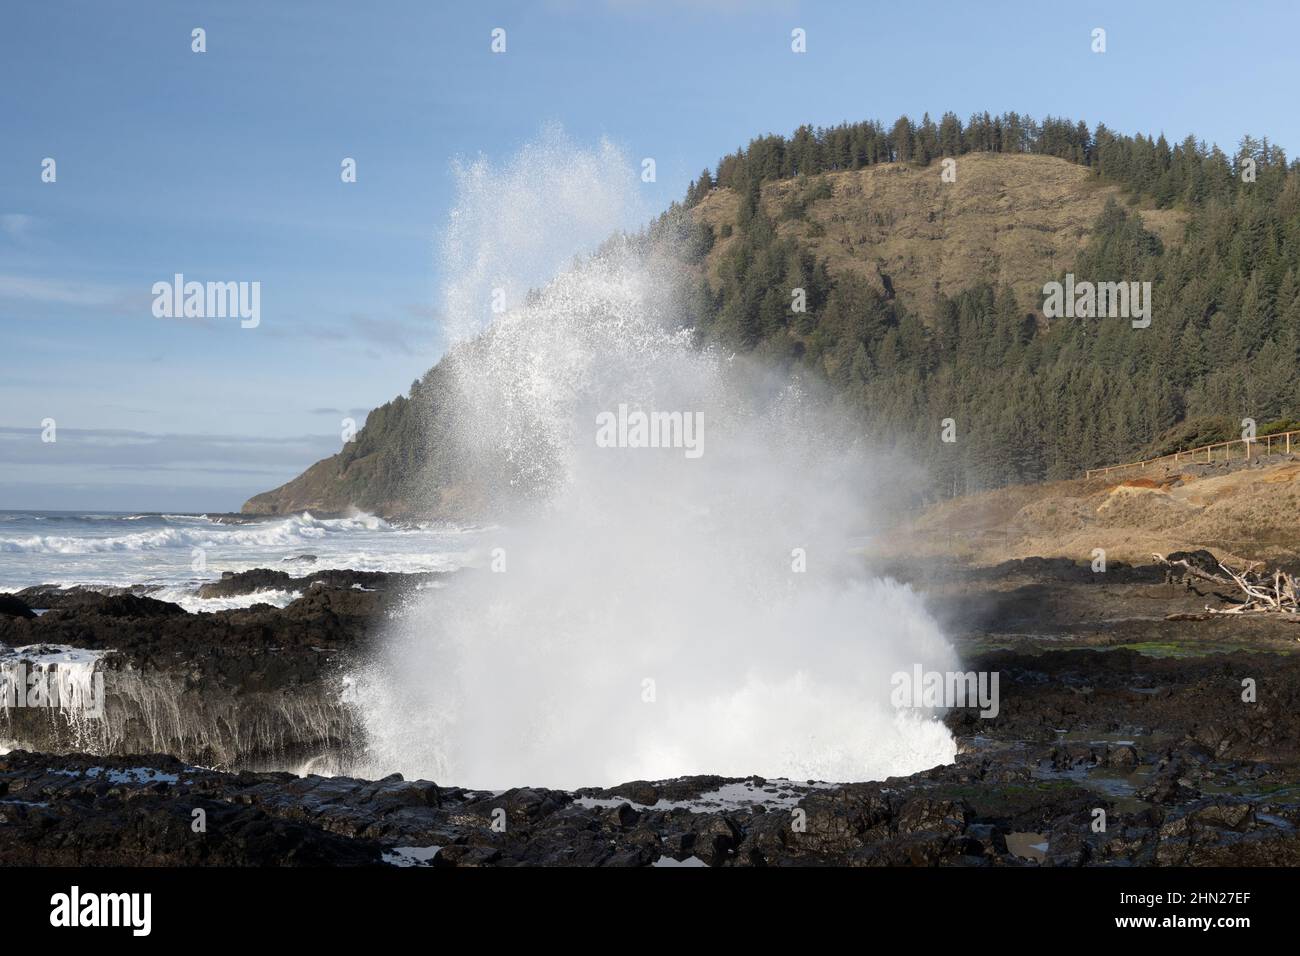 Ocean spray, from a wave colliding with an uplifted marine terrace. Cape Perpetua, Oregon, in background. USA Stock Photo